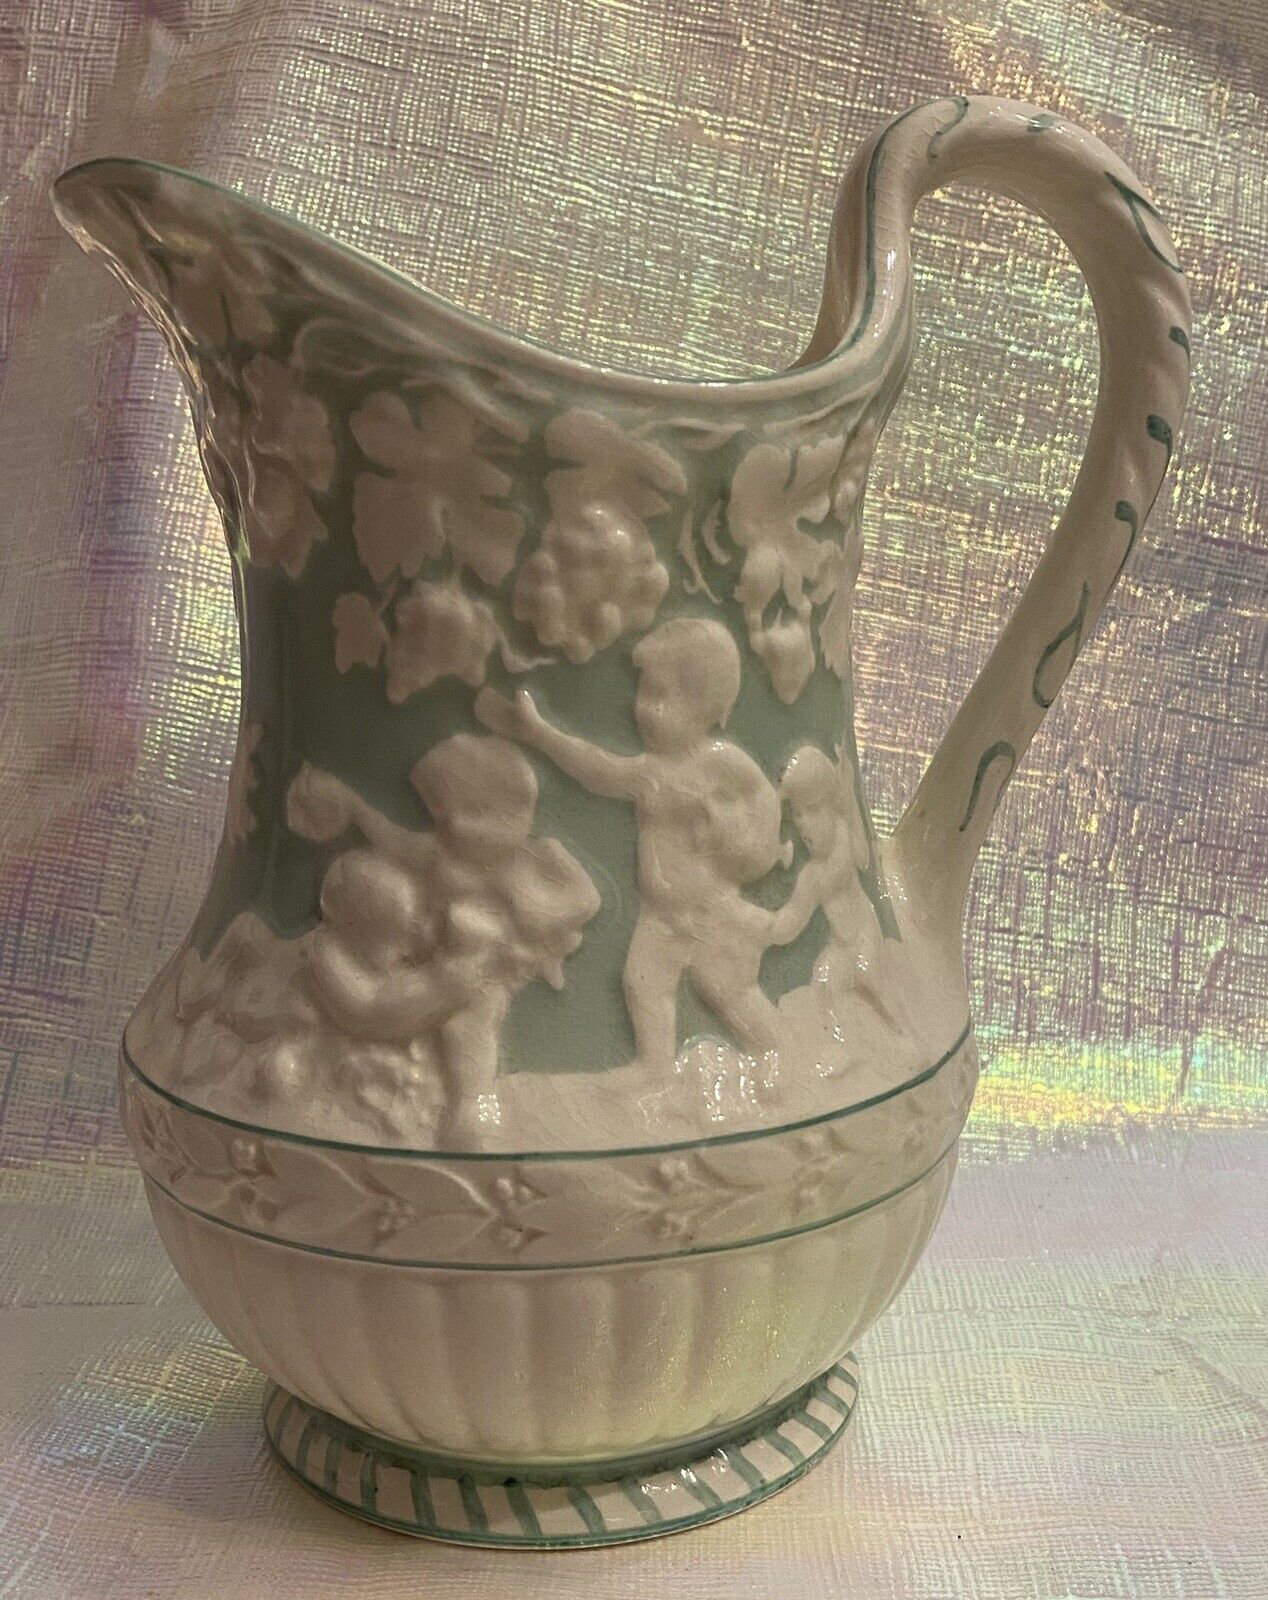 Antique “Wedgwood Etruria England”Pitcher Raised Grapes And Children